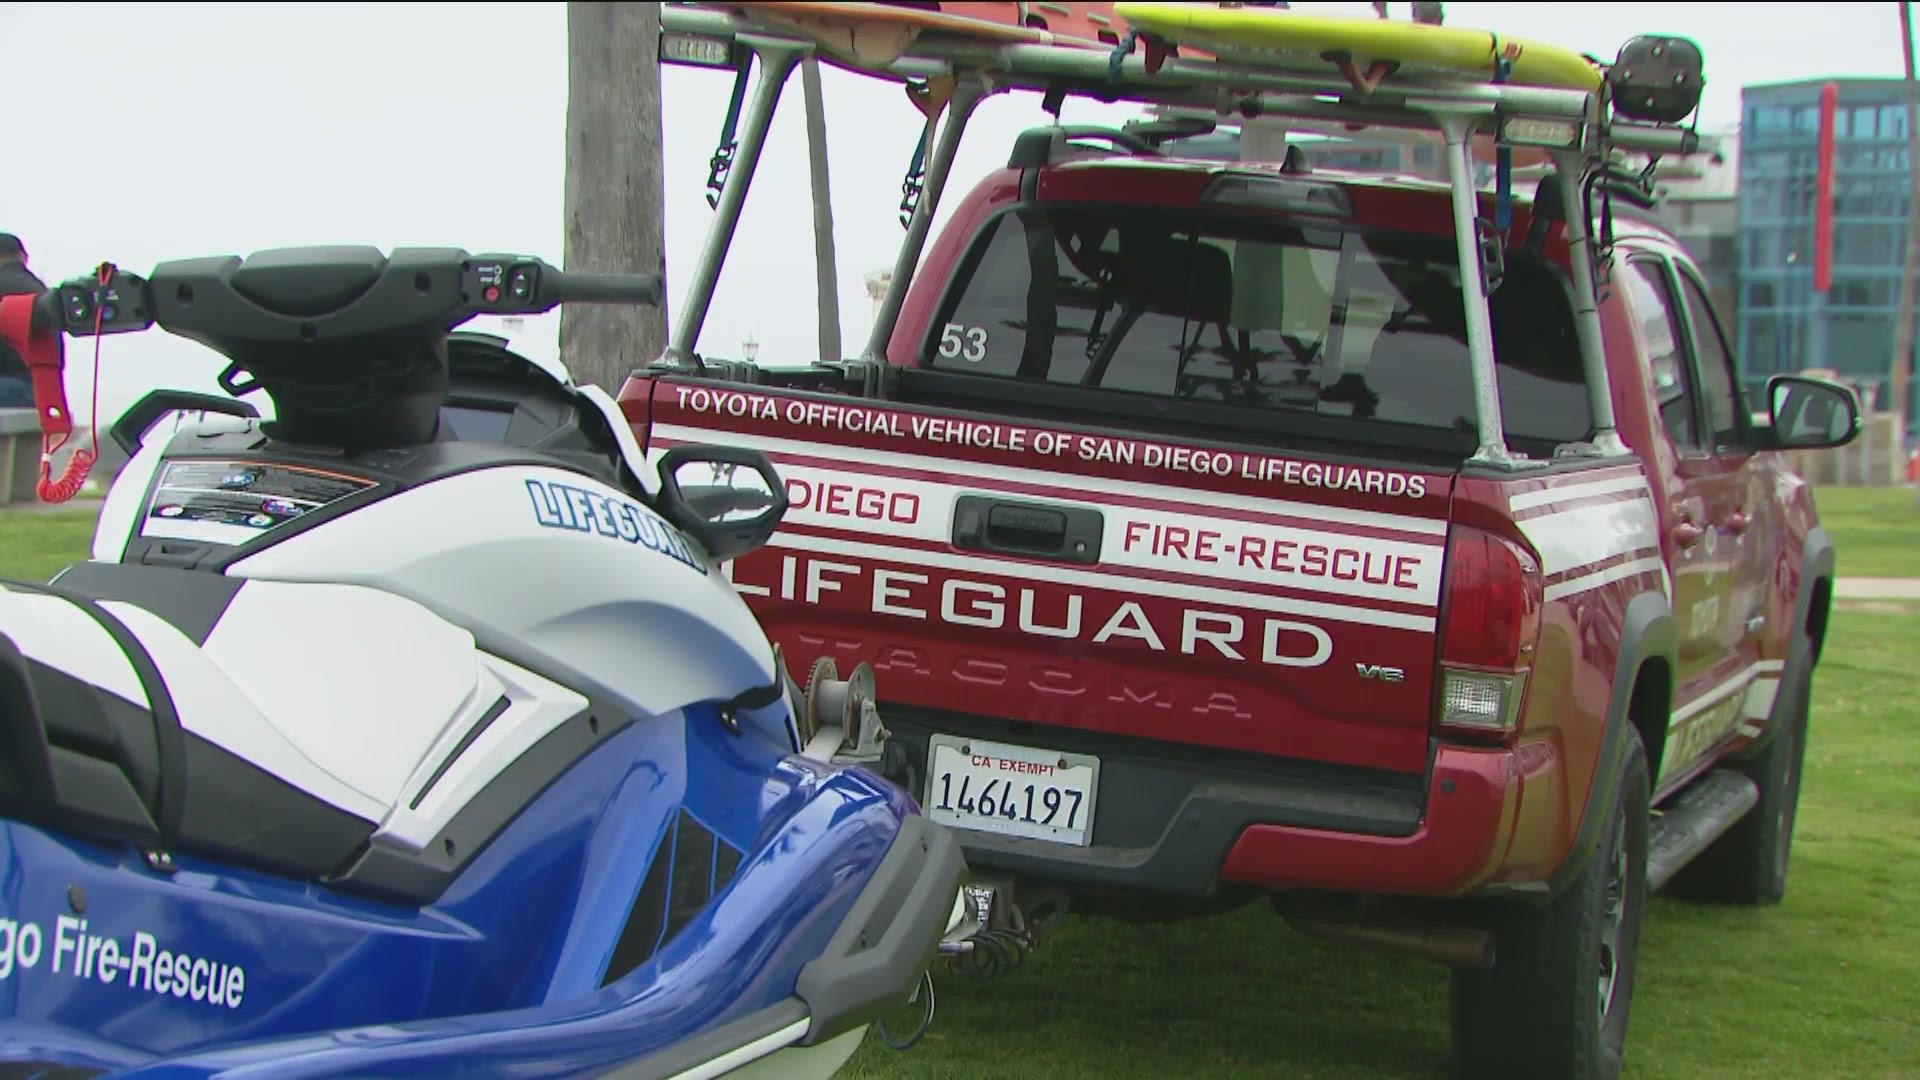 First responders are preparing for the Memorial Day weekend. Police will be on foot, bike, four wheelers and driving around making sure people are staying safe.